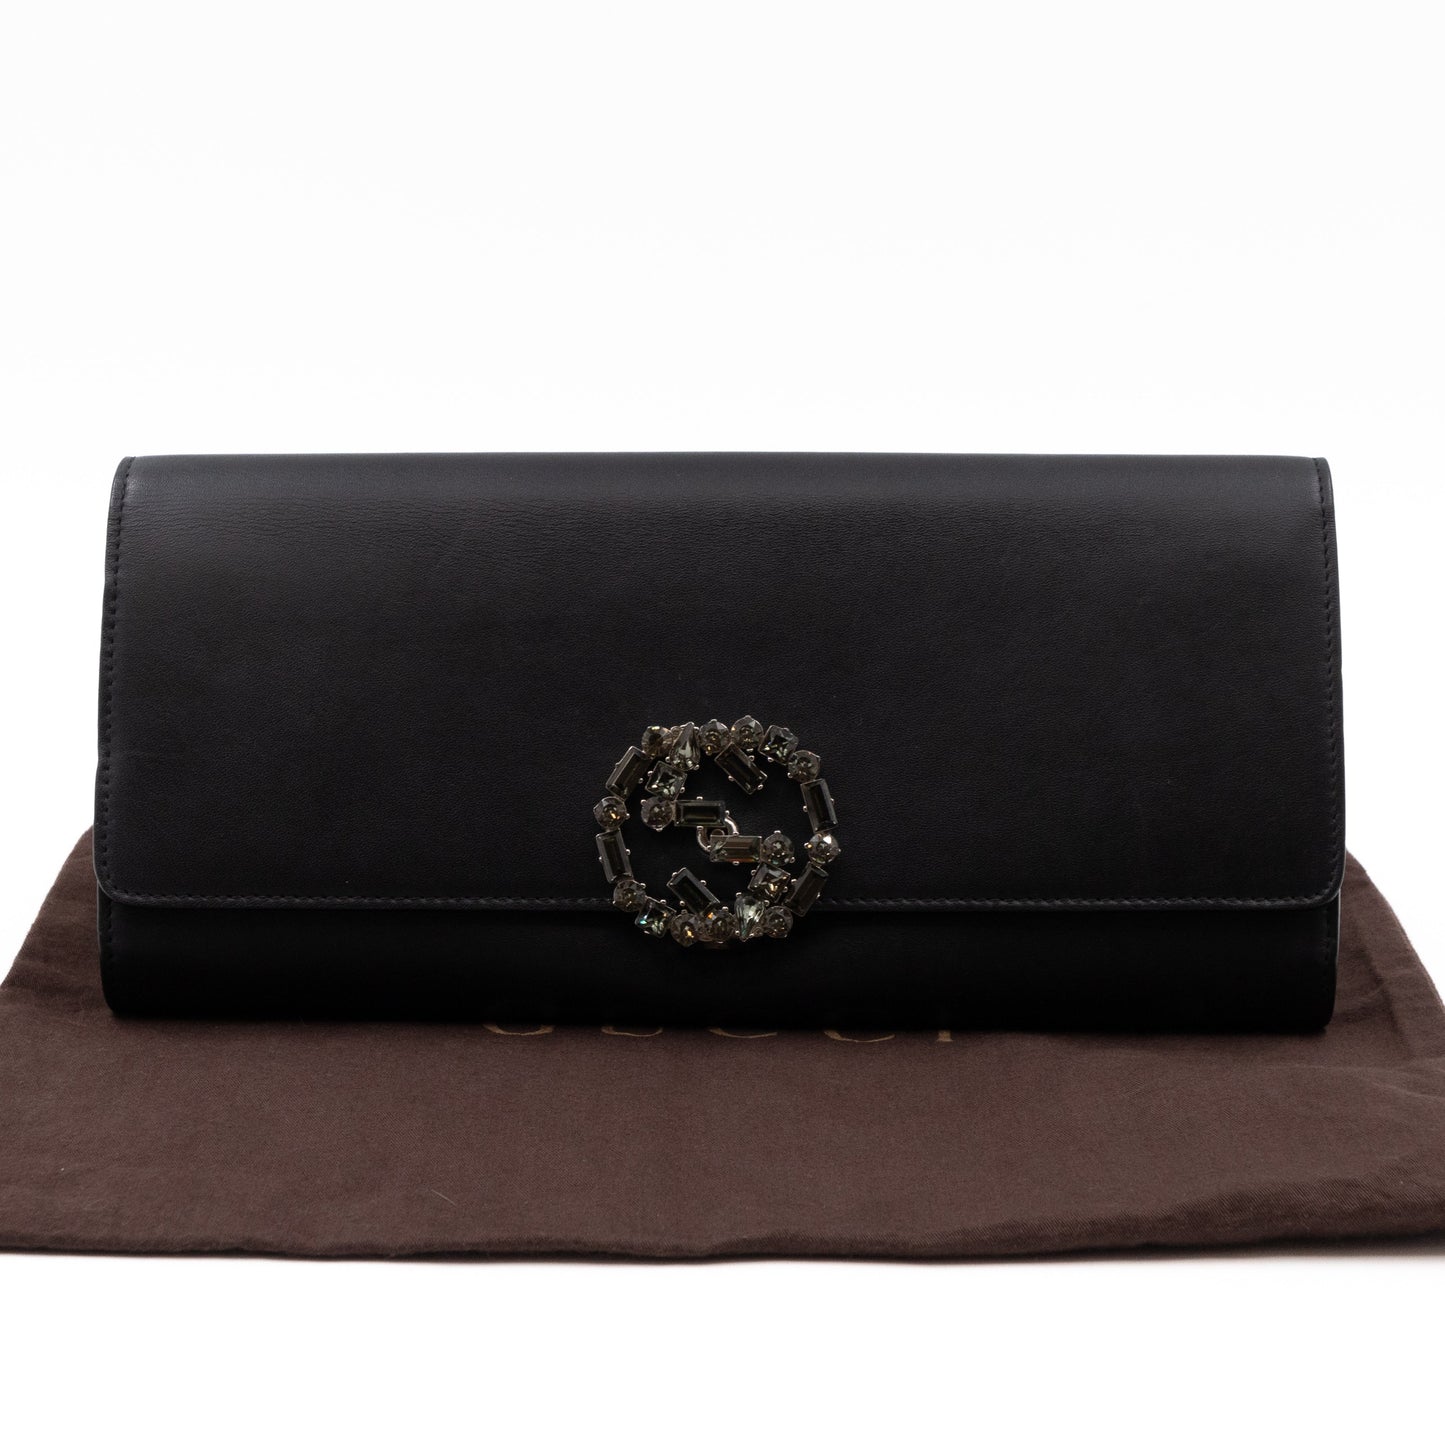 Broadway Clutch Black Leather with Crystals